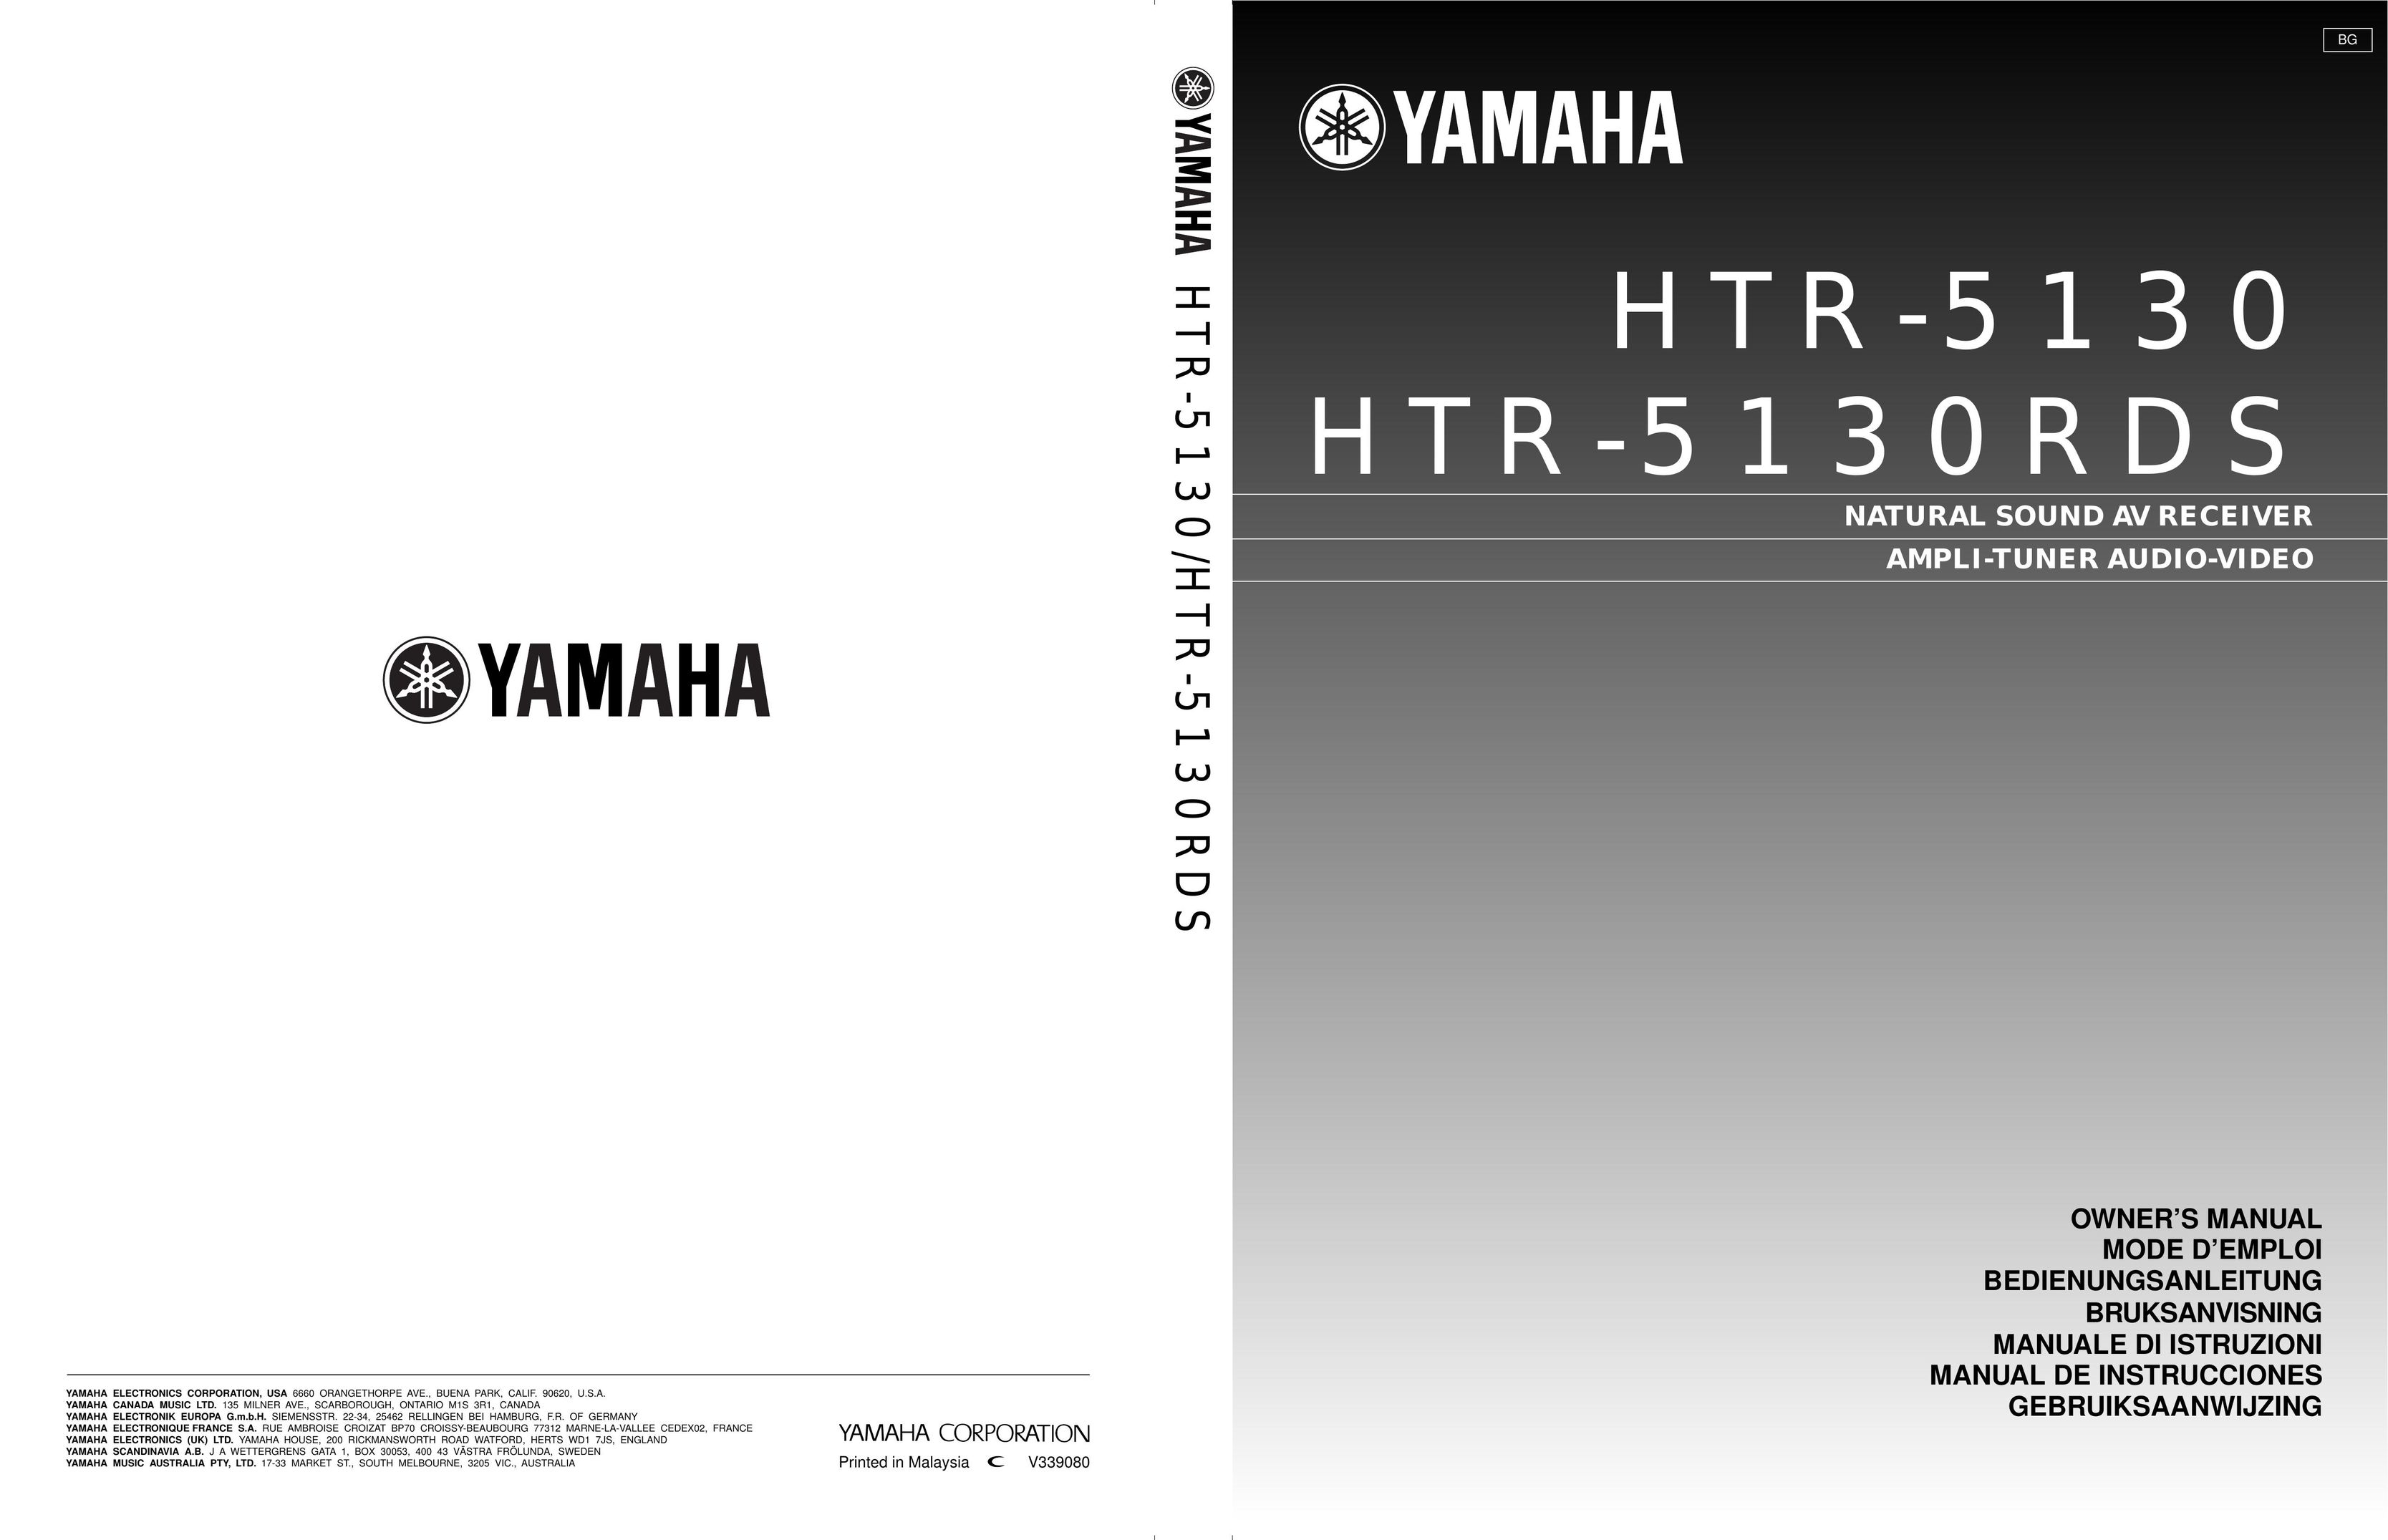 Yamaha HTR-5130RDS Stereo Receiver User Manual